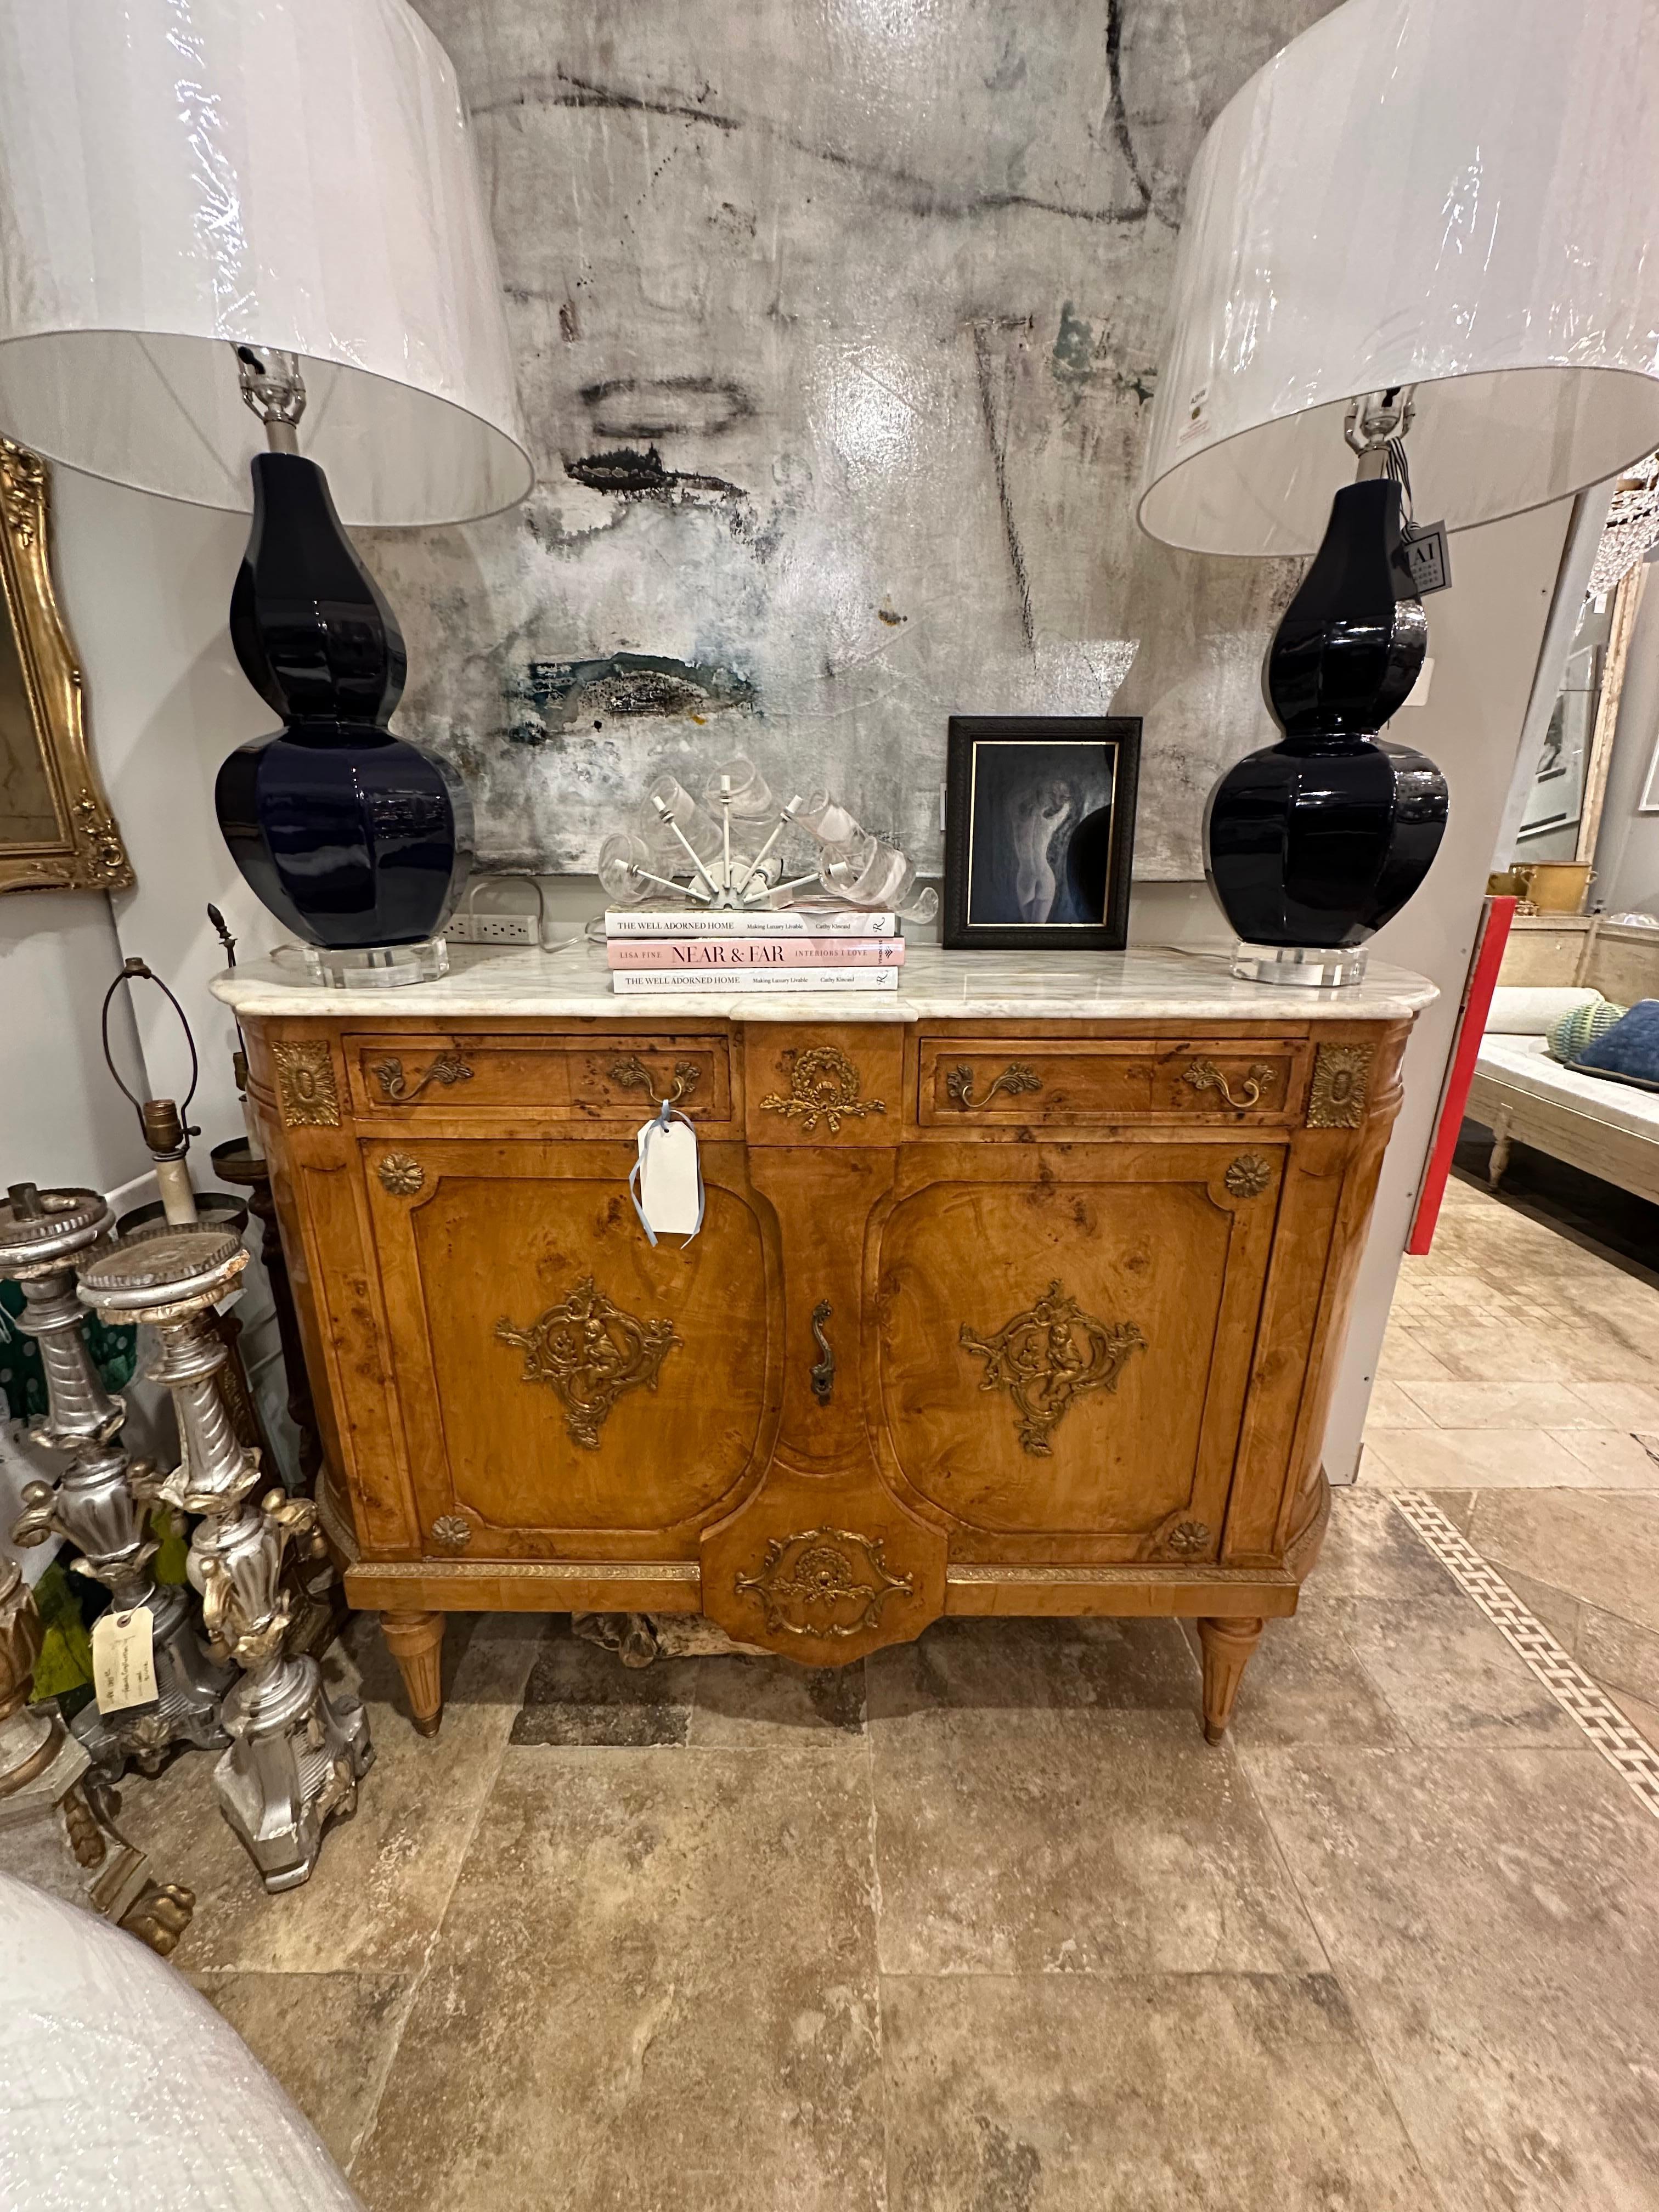 The 19th Century French Louis XV Style Marble Top Sideboard epitomizes the opulence and refinement of the period. Crafted with exquisite attention to detail, it boasts a sumptuous marble top that adds a touch of luxury to any room. The sideboard